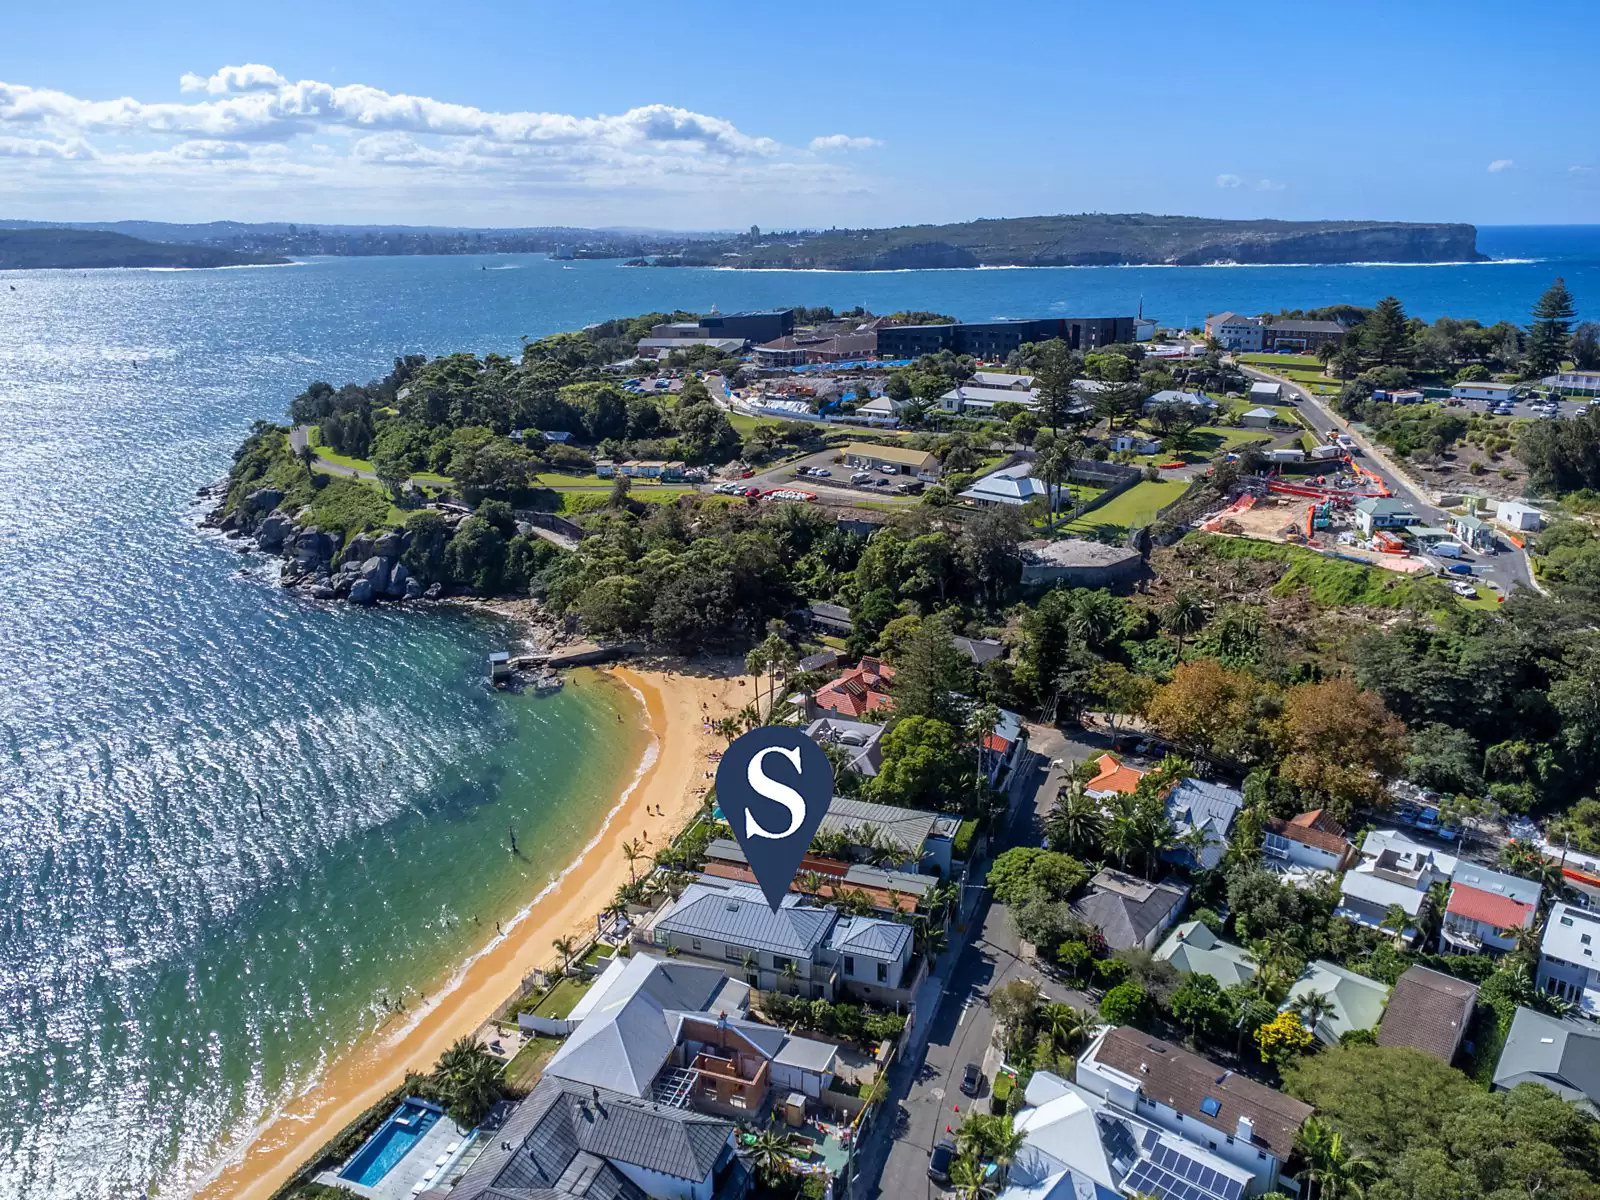 Photo #4: 13 Victoria Street, Watsons Bay - Sold by Sydney Sotheby's International Realty